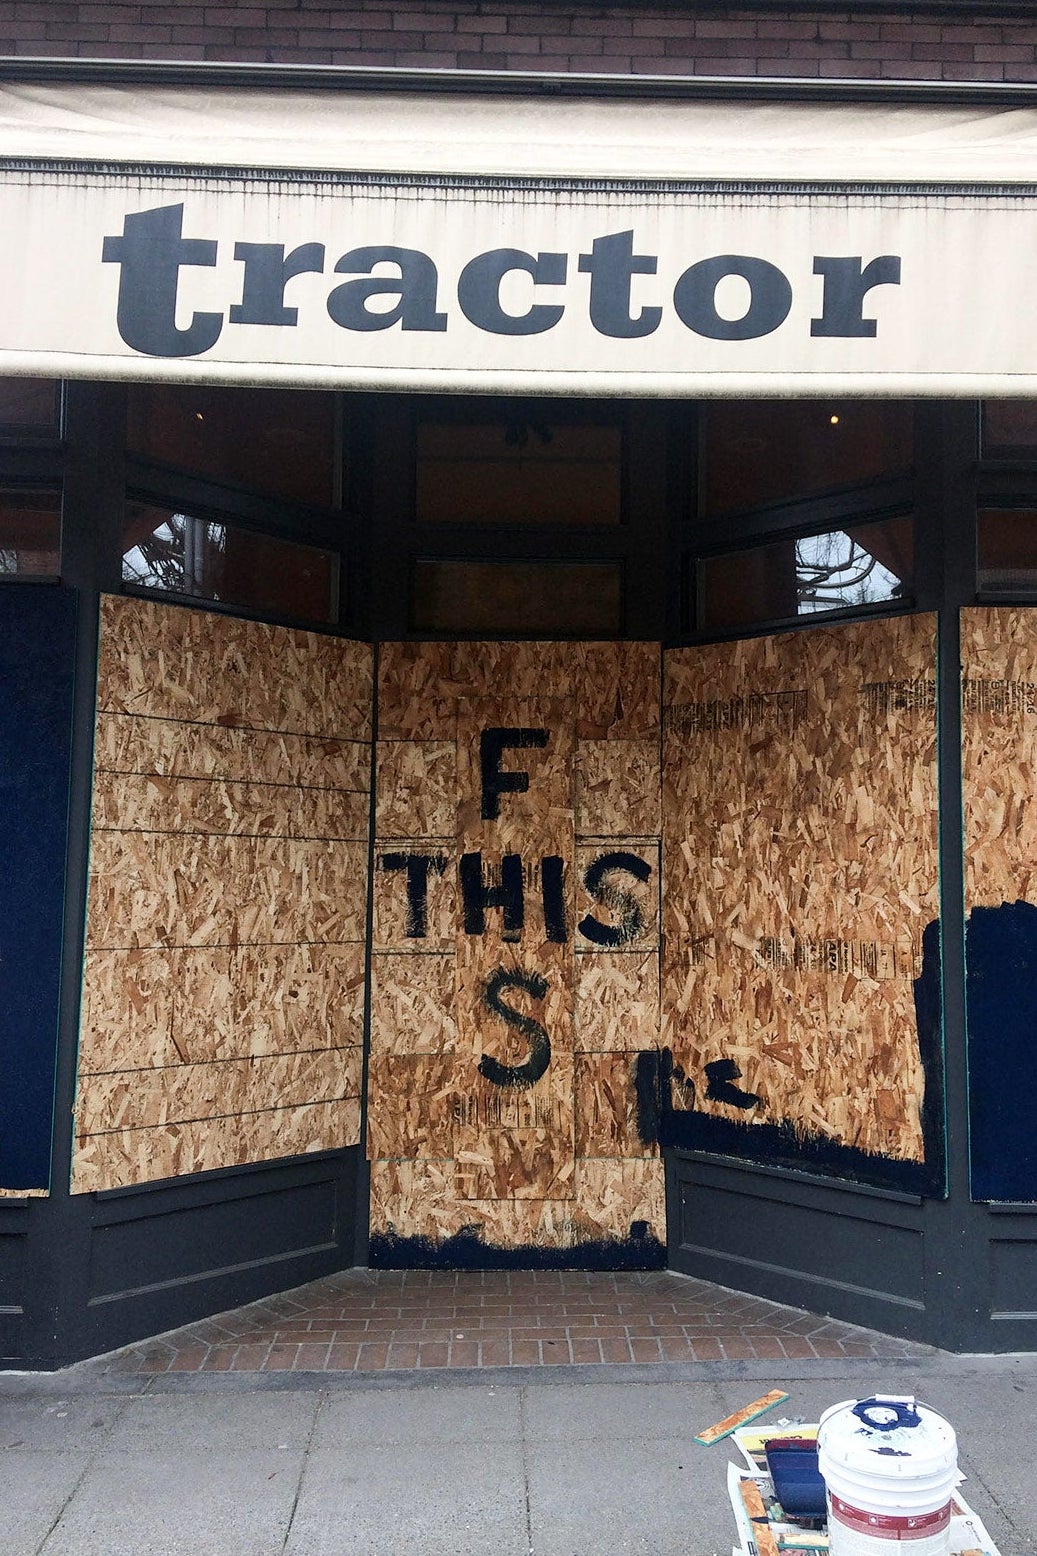 Boarded-up windows say "F This S."